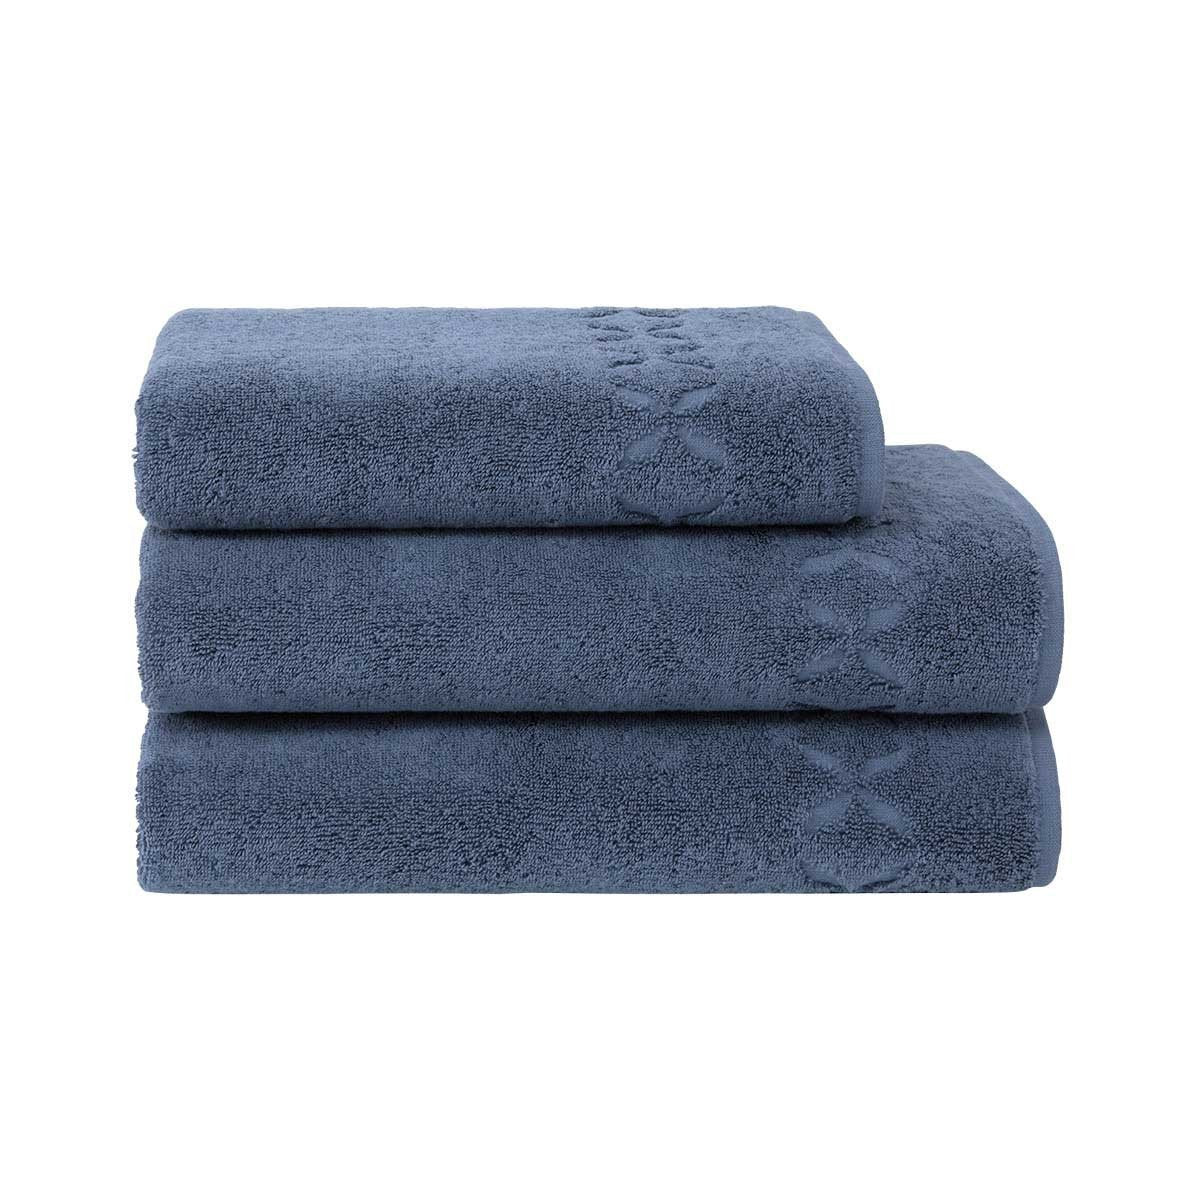 Yves Delorme ‐ Yves Delorme Etoile Towels ‐ Pioneer Linens